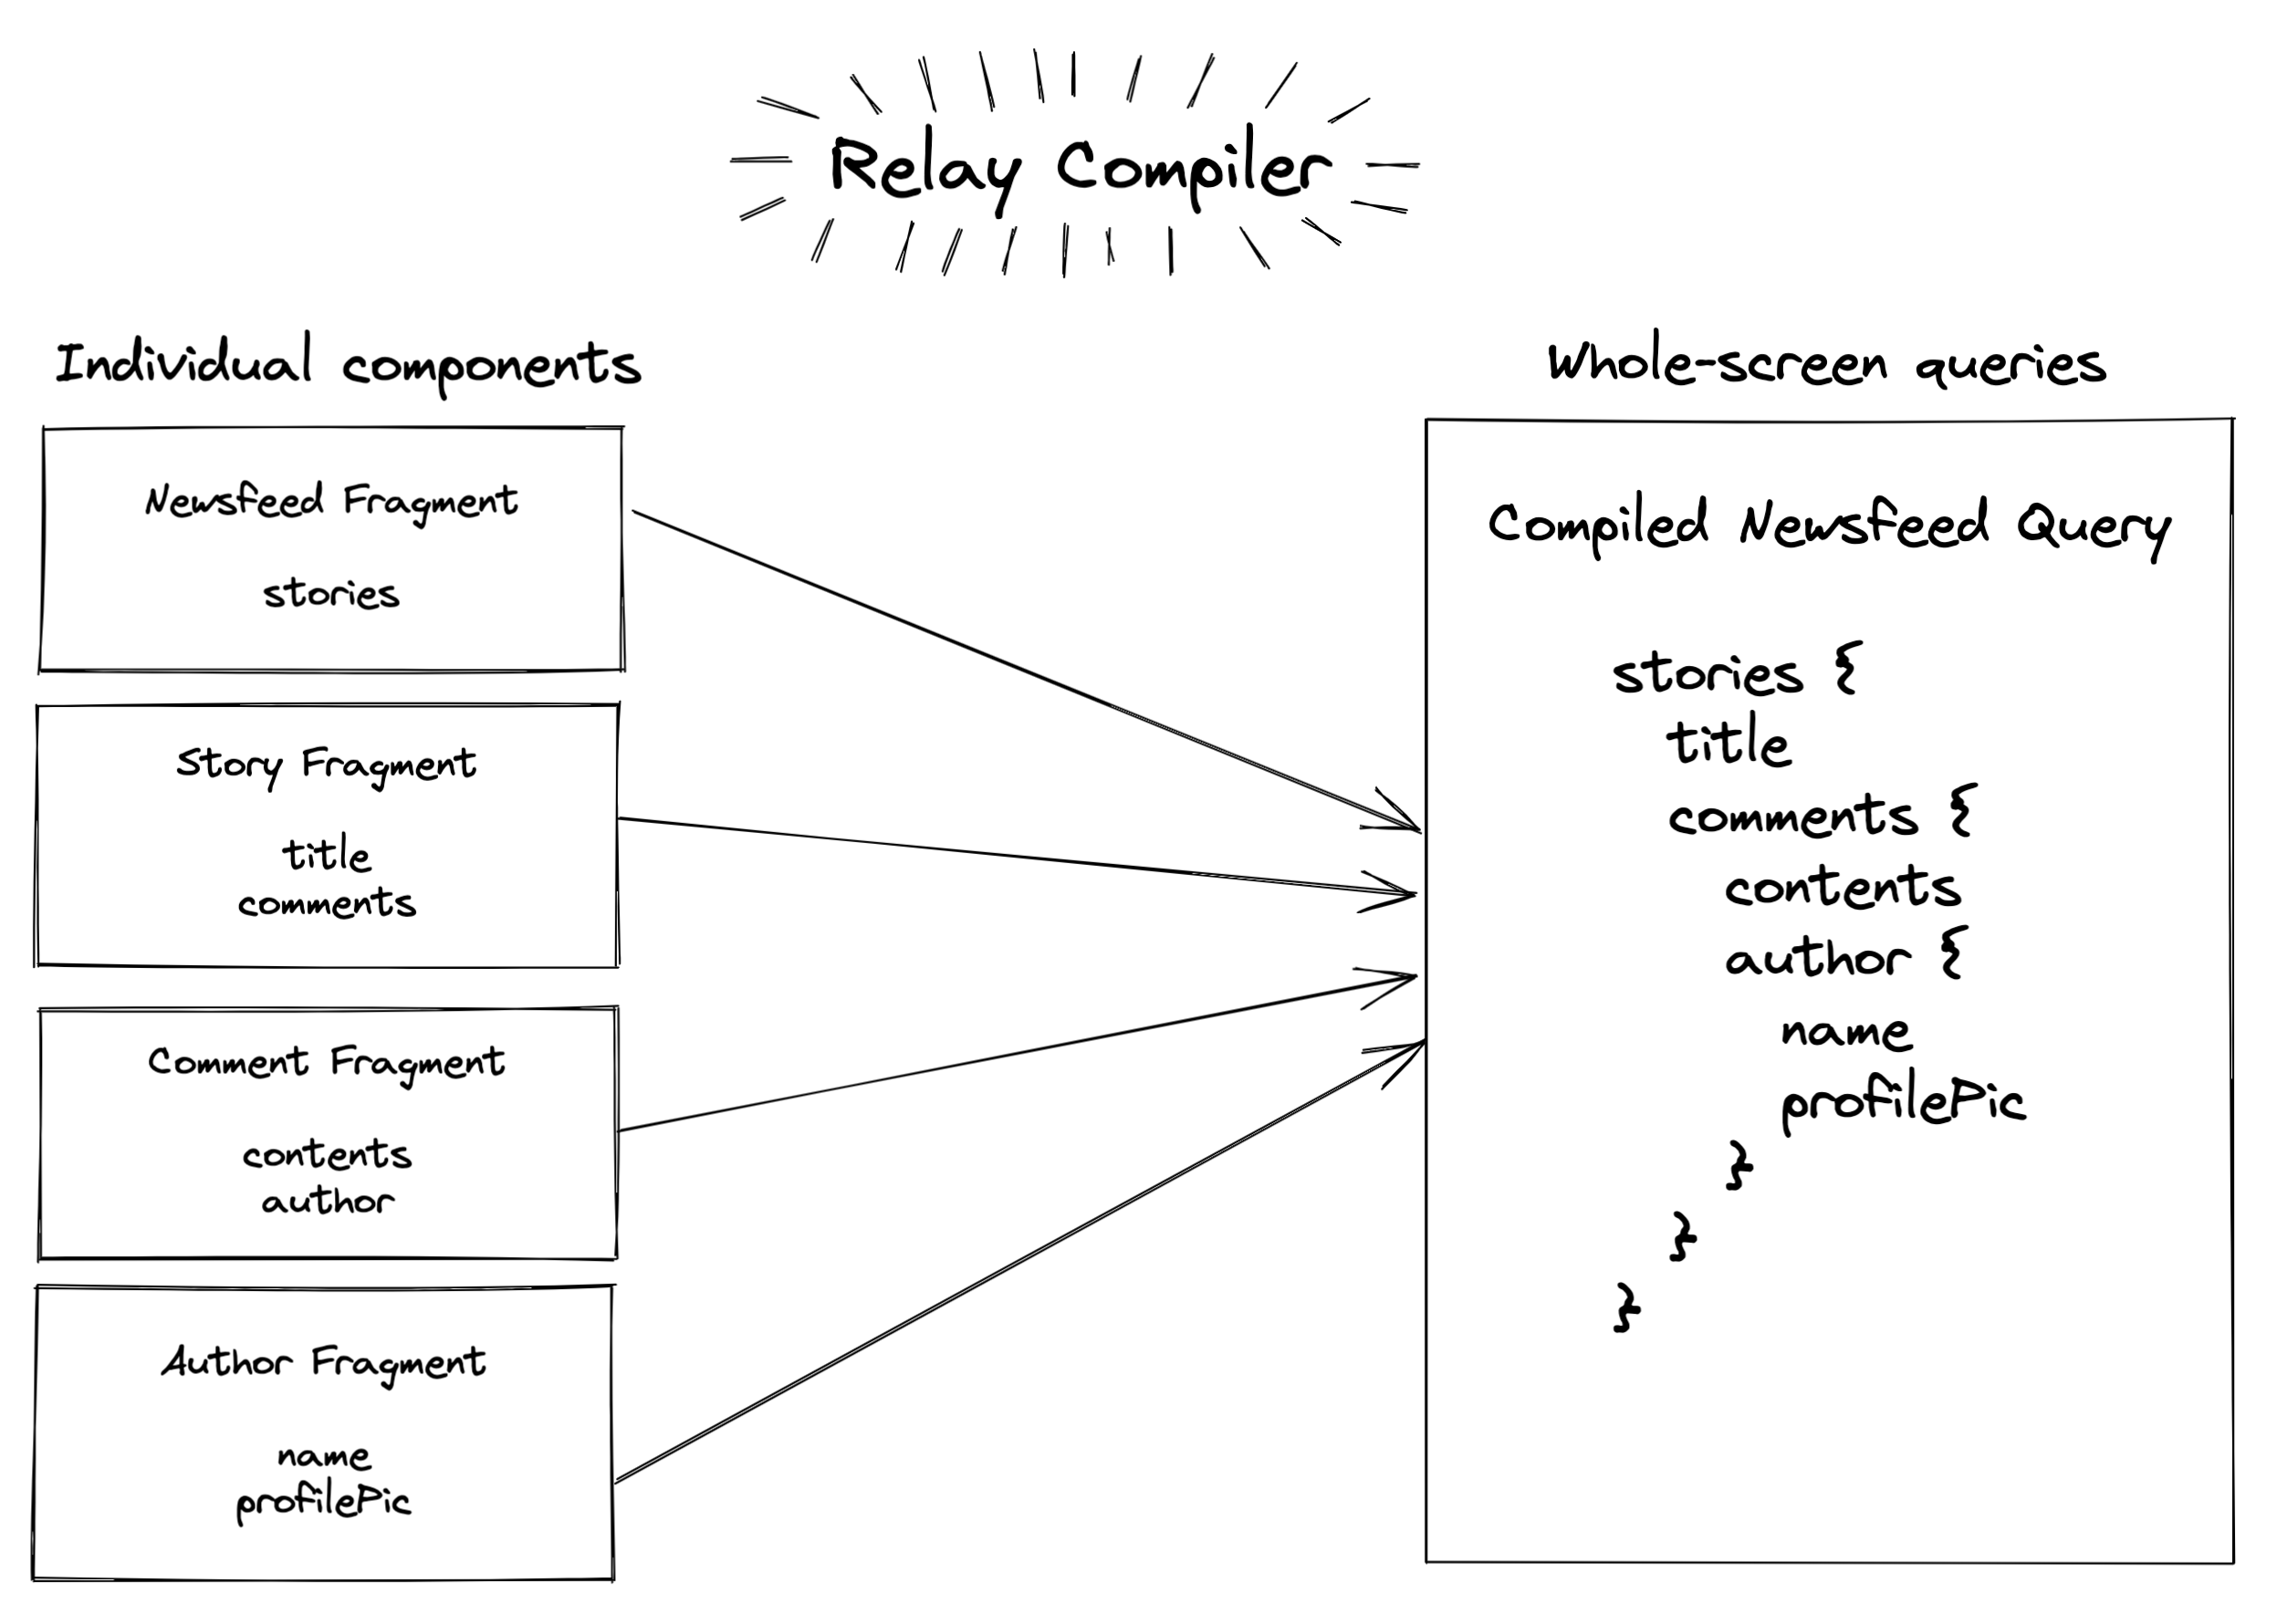 The Relay Compiler combines fragments into a query